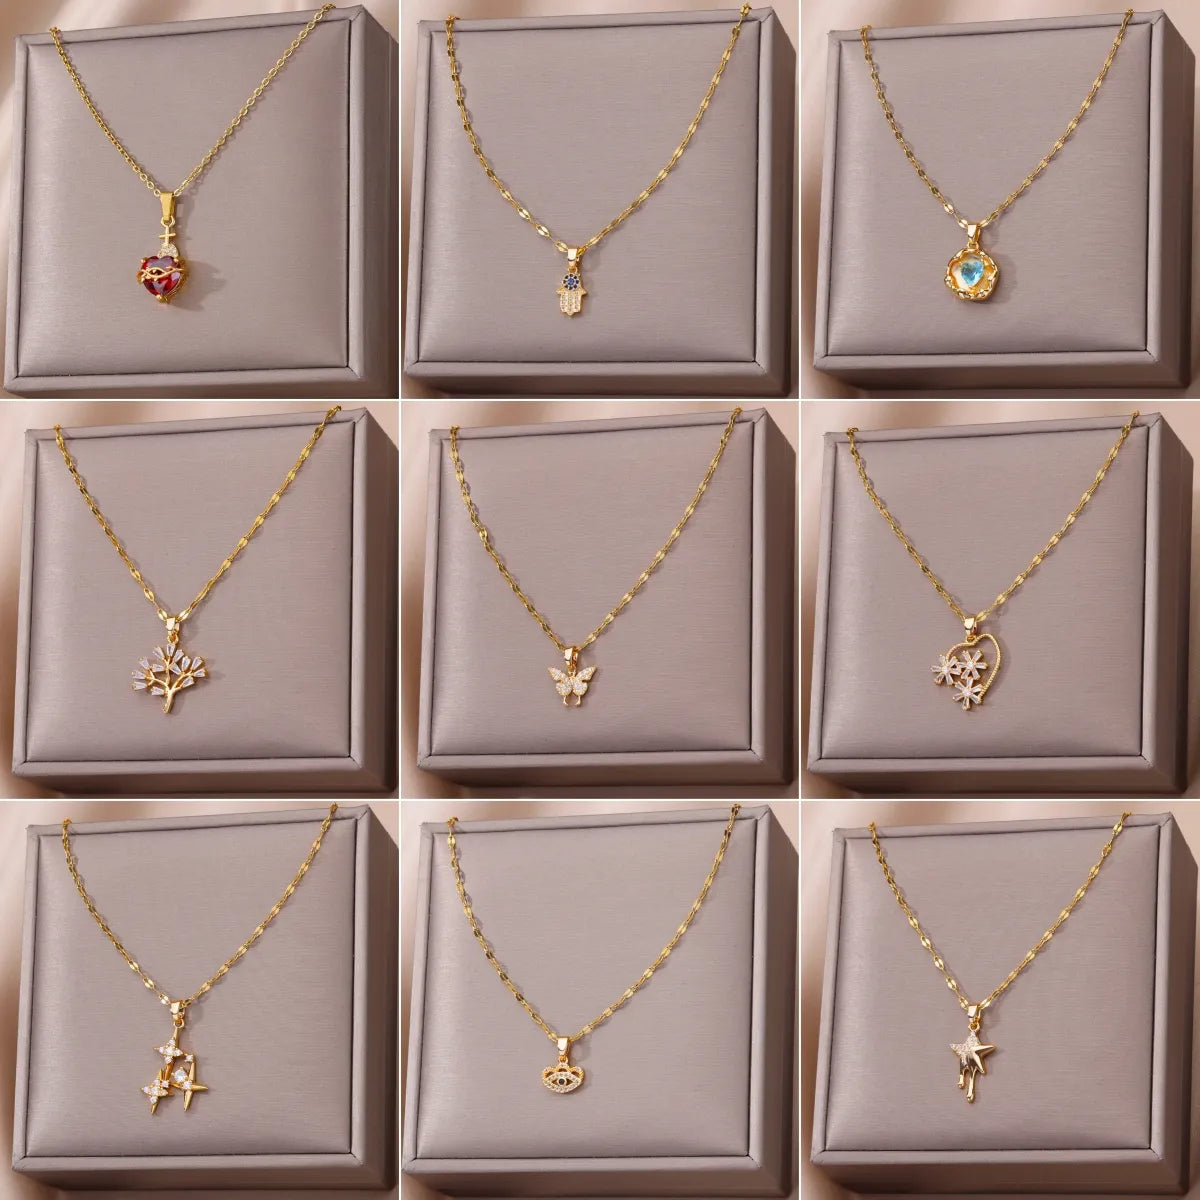 Butterfly Zircon Necklace For Women Luxury Flower Gold Color Stainless Steel Chain Adjustable Necklace Wedding Jewelry Gift New